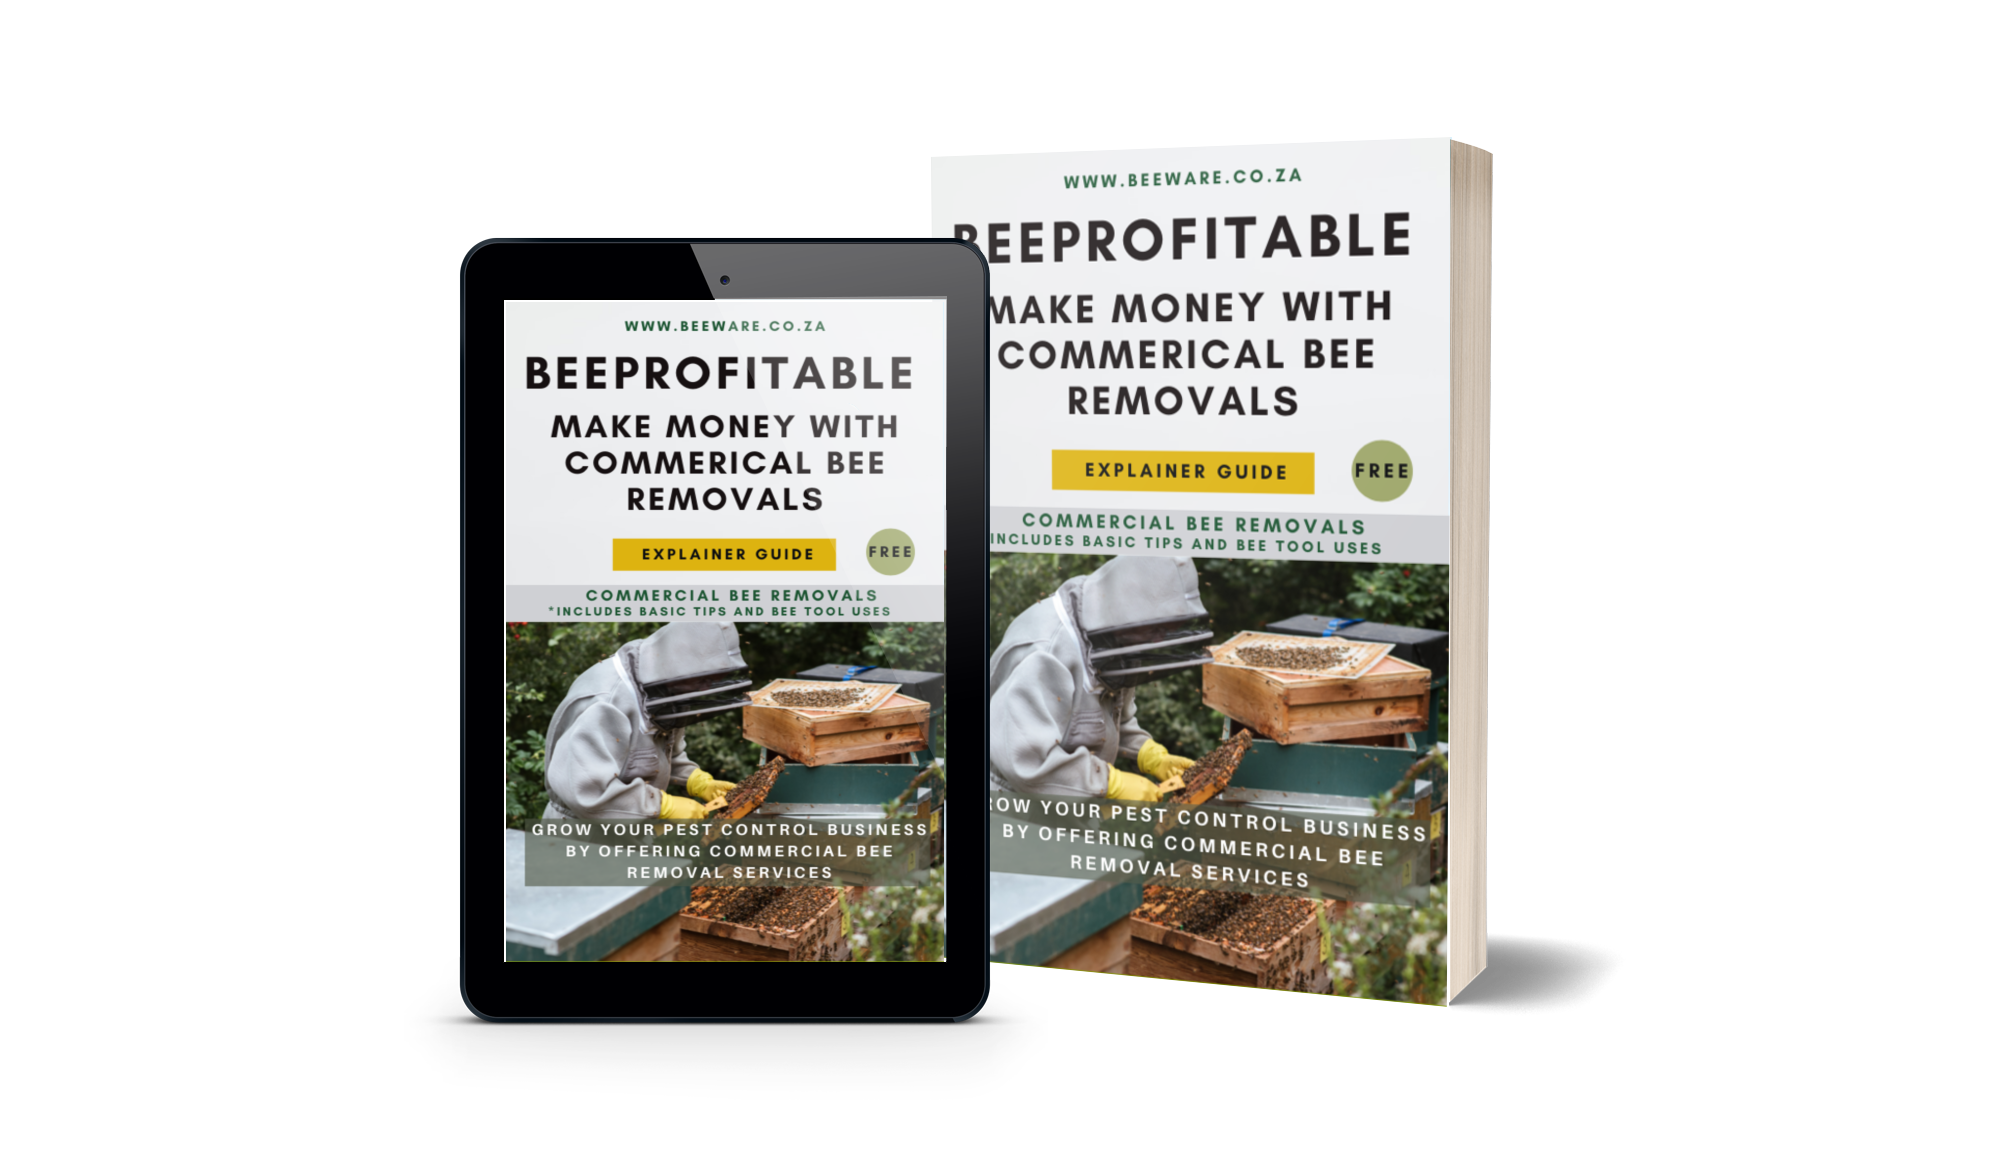 Bee Profitable - Make Money with bees pdf. Will beekeepers remove bees for free? bee removal course